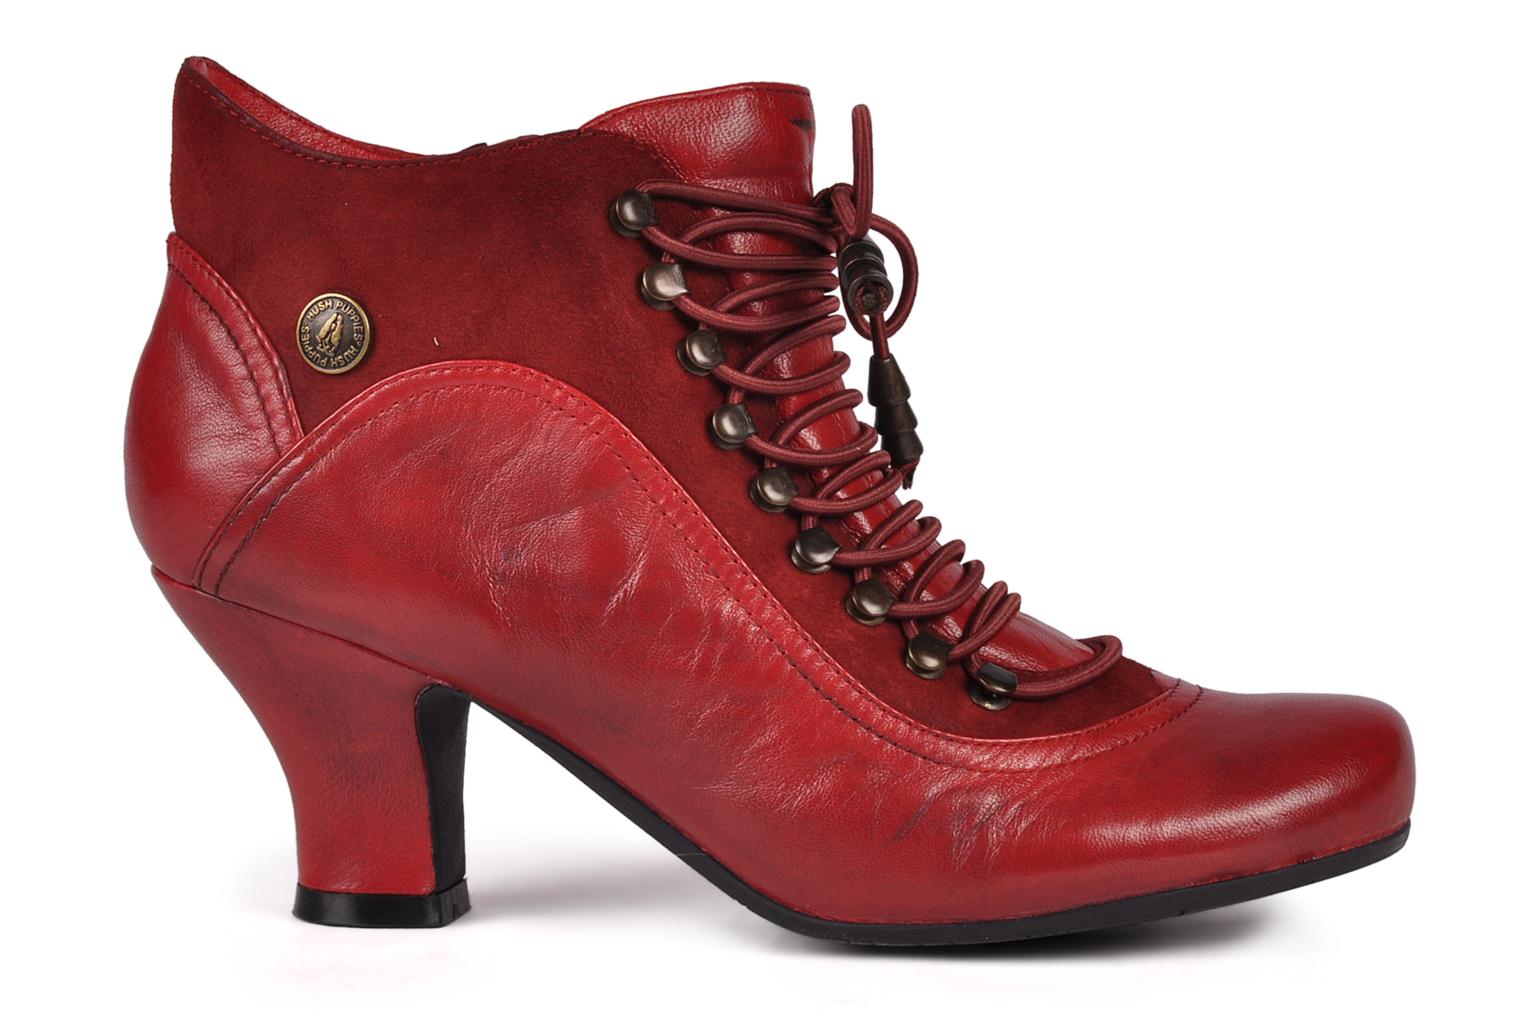 Hush Puppies Vivianna Ankle boots in Red at Sarenza.co.uk (46490)